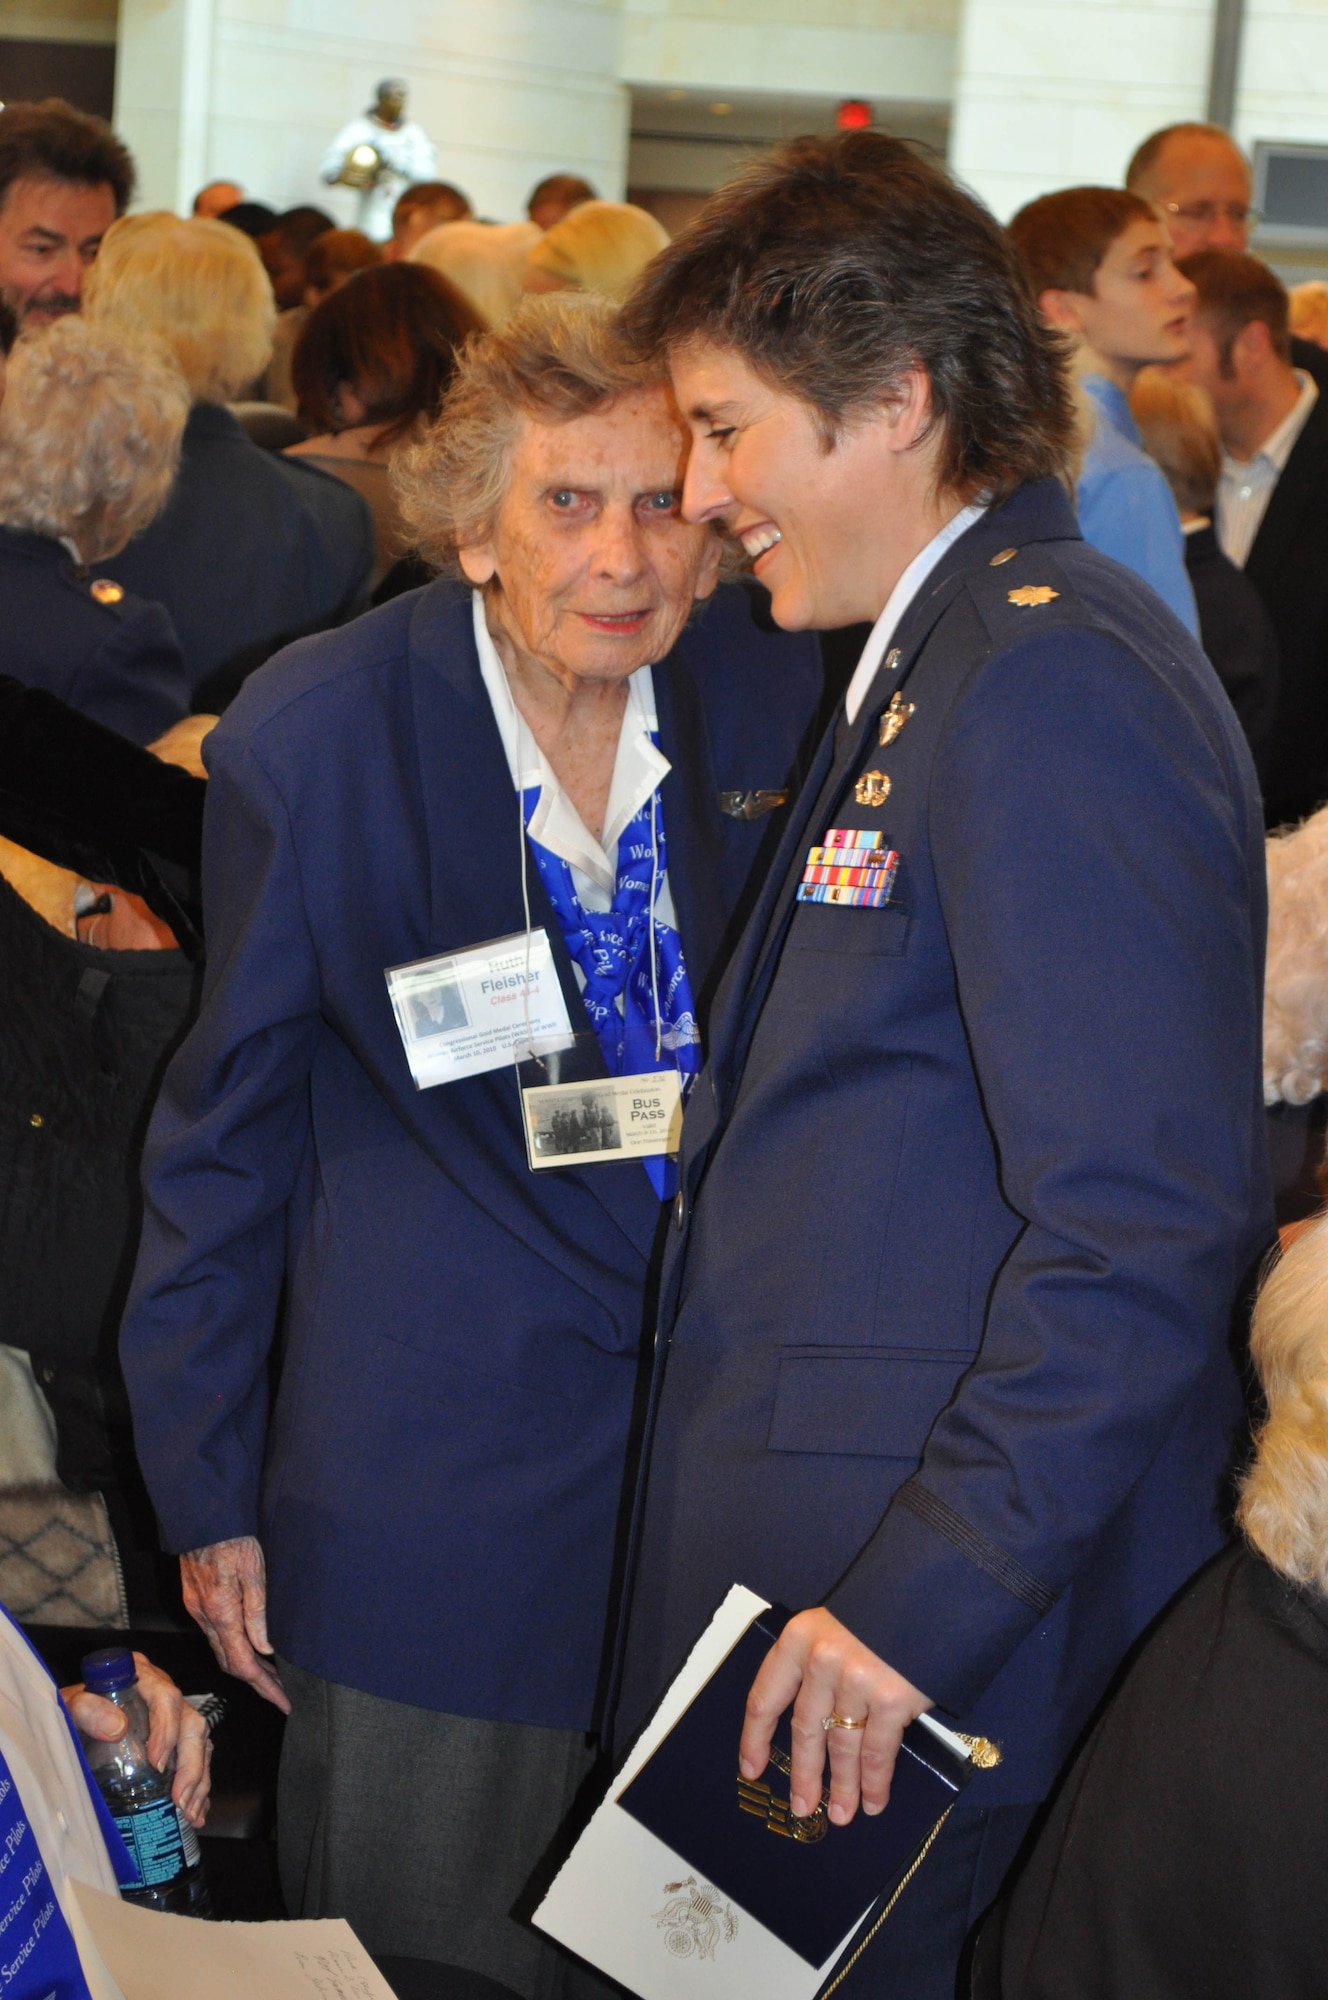 JOINT BASE MCGUIRE-DIX-LAKEHURST, N.J. - Lt. Col. Rhonda Kelly is one of 25 Reserve members here who helped present the Women AirForce Service Pilots with a Congressional Gold Medal during the WASP Gold Medal Ceremony held March 10 on Capitol Hill in Washington, D.C. With less than 300 WASPs alive today, about 180 made the trip to the nation's capitol to receive recognition and thanks for their service performed during World War II. (U.S. Air Force photo/Col. Giordano B. McMullen)